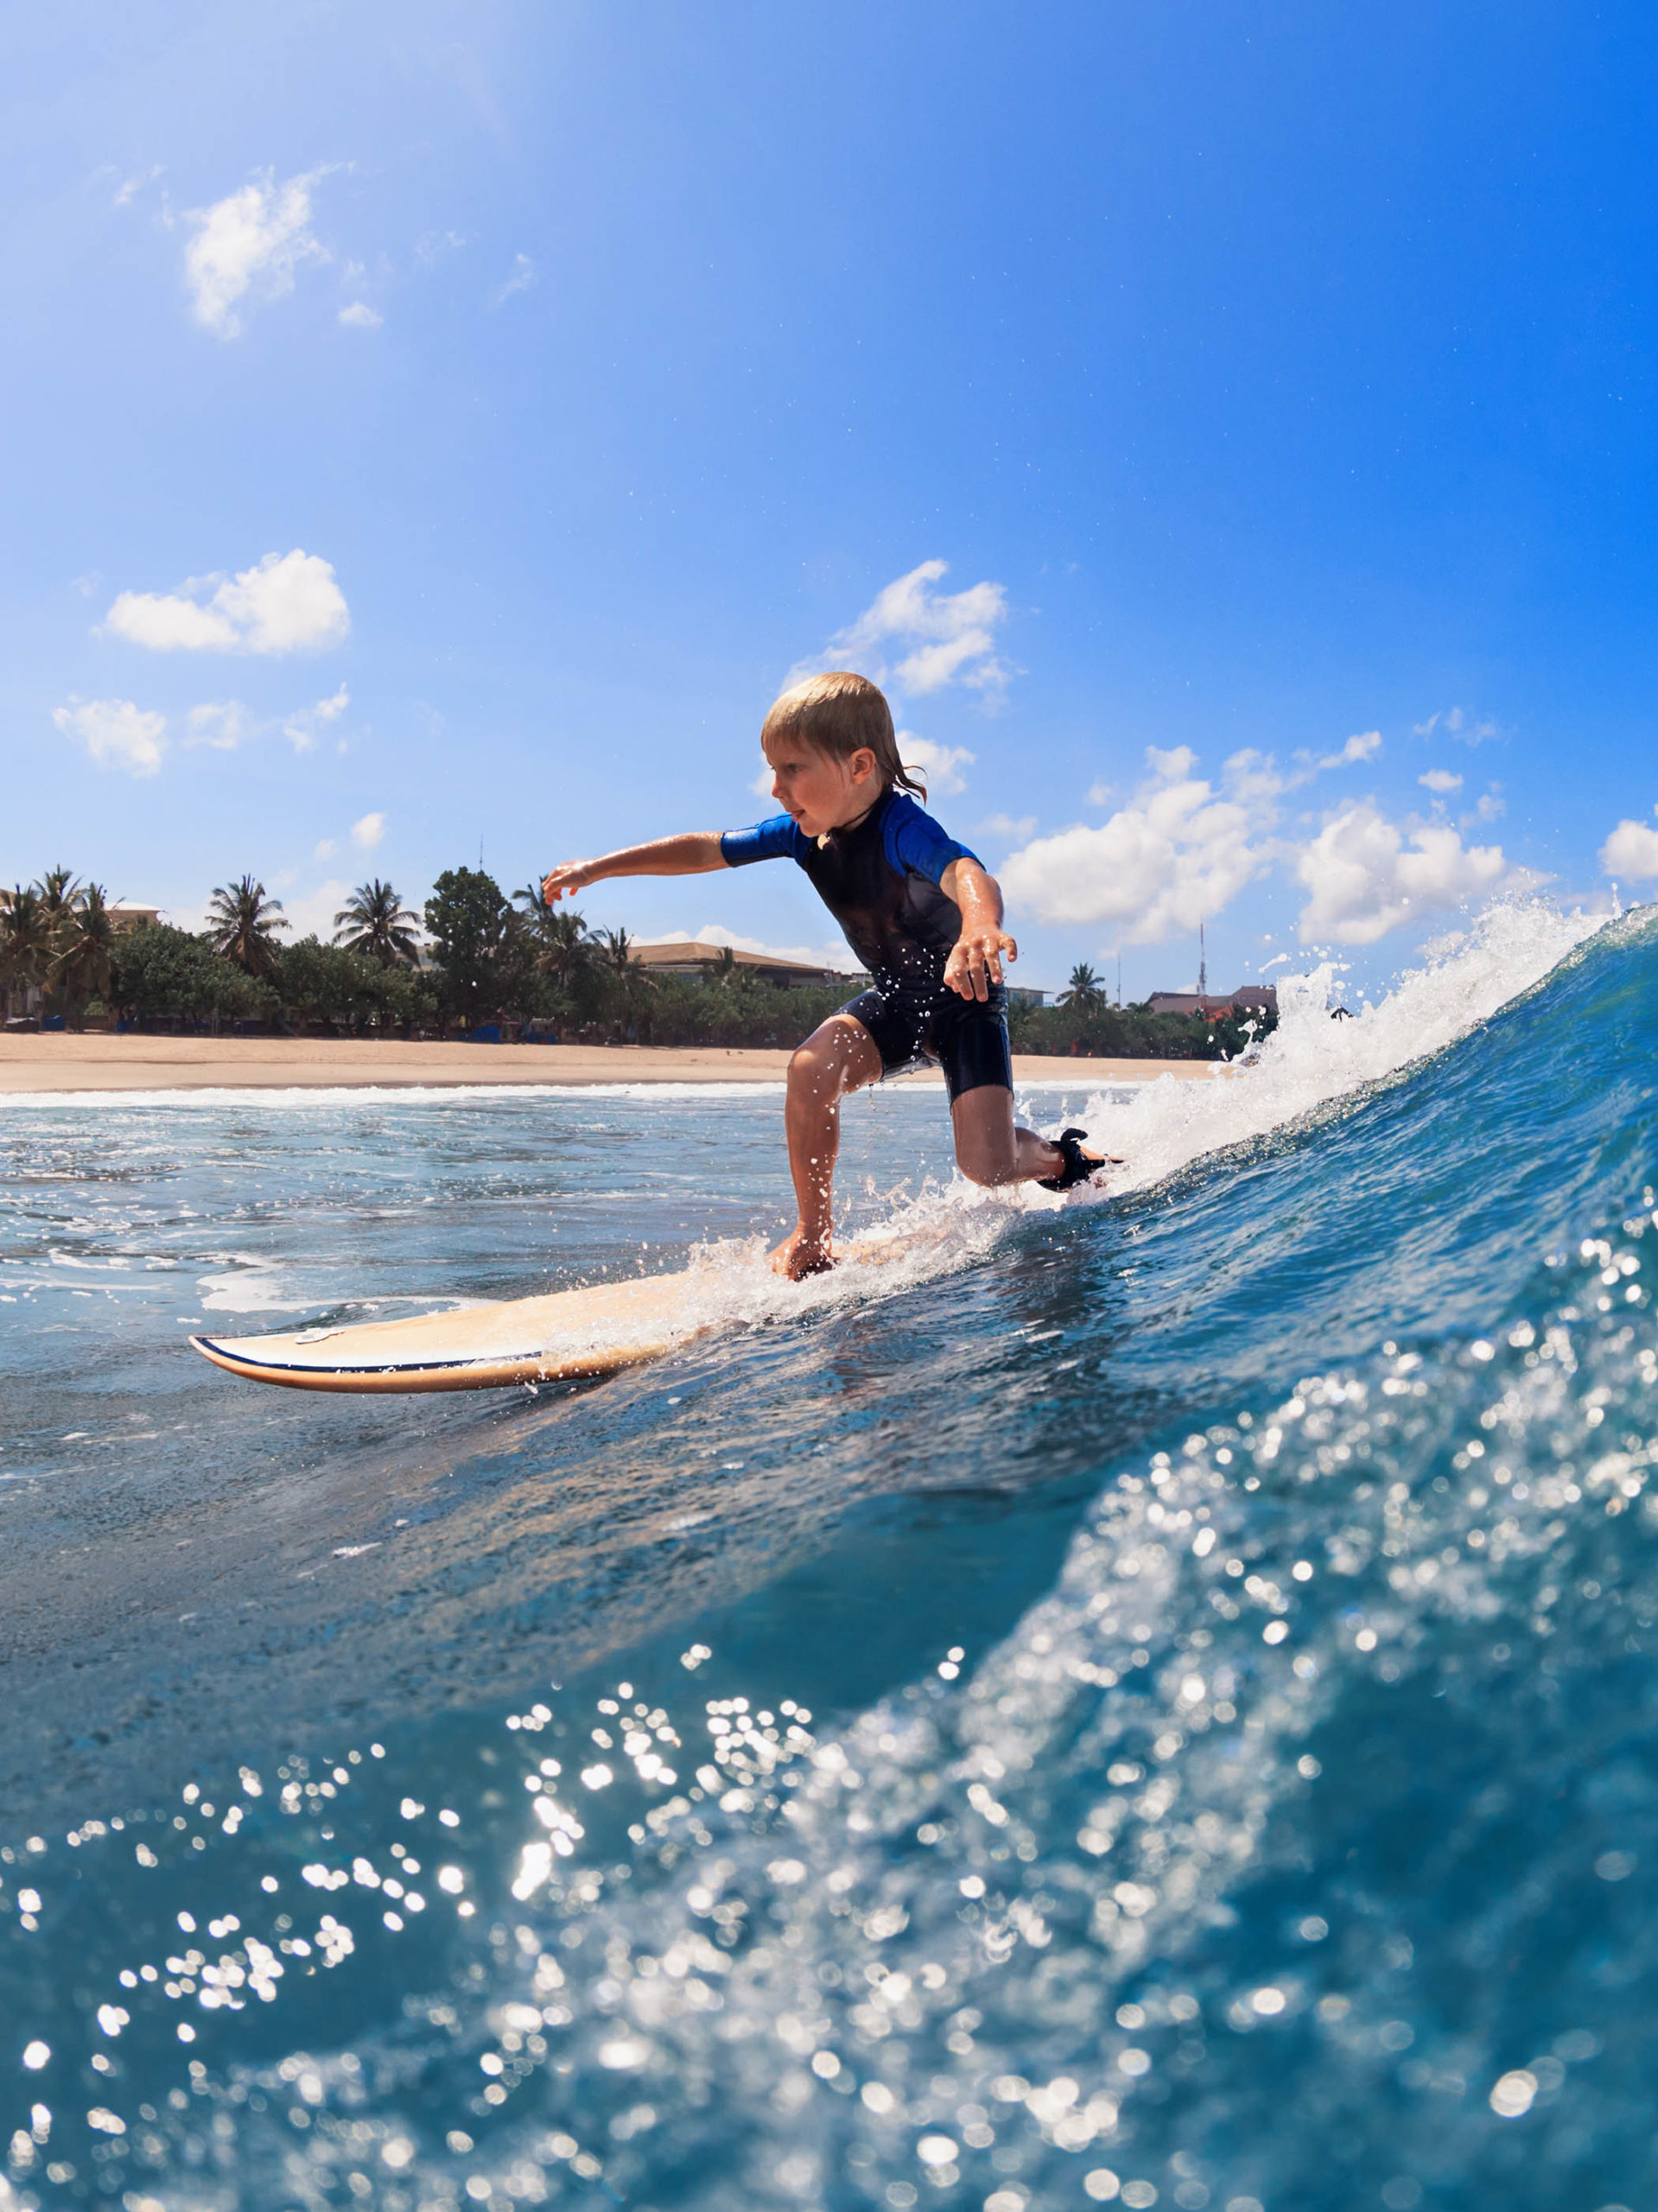 young surfer learns to ride standing up on surfboard